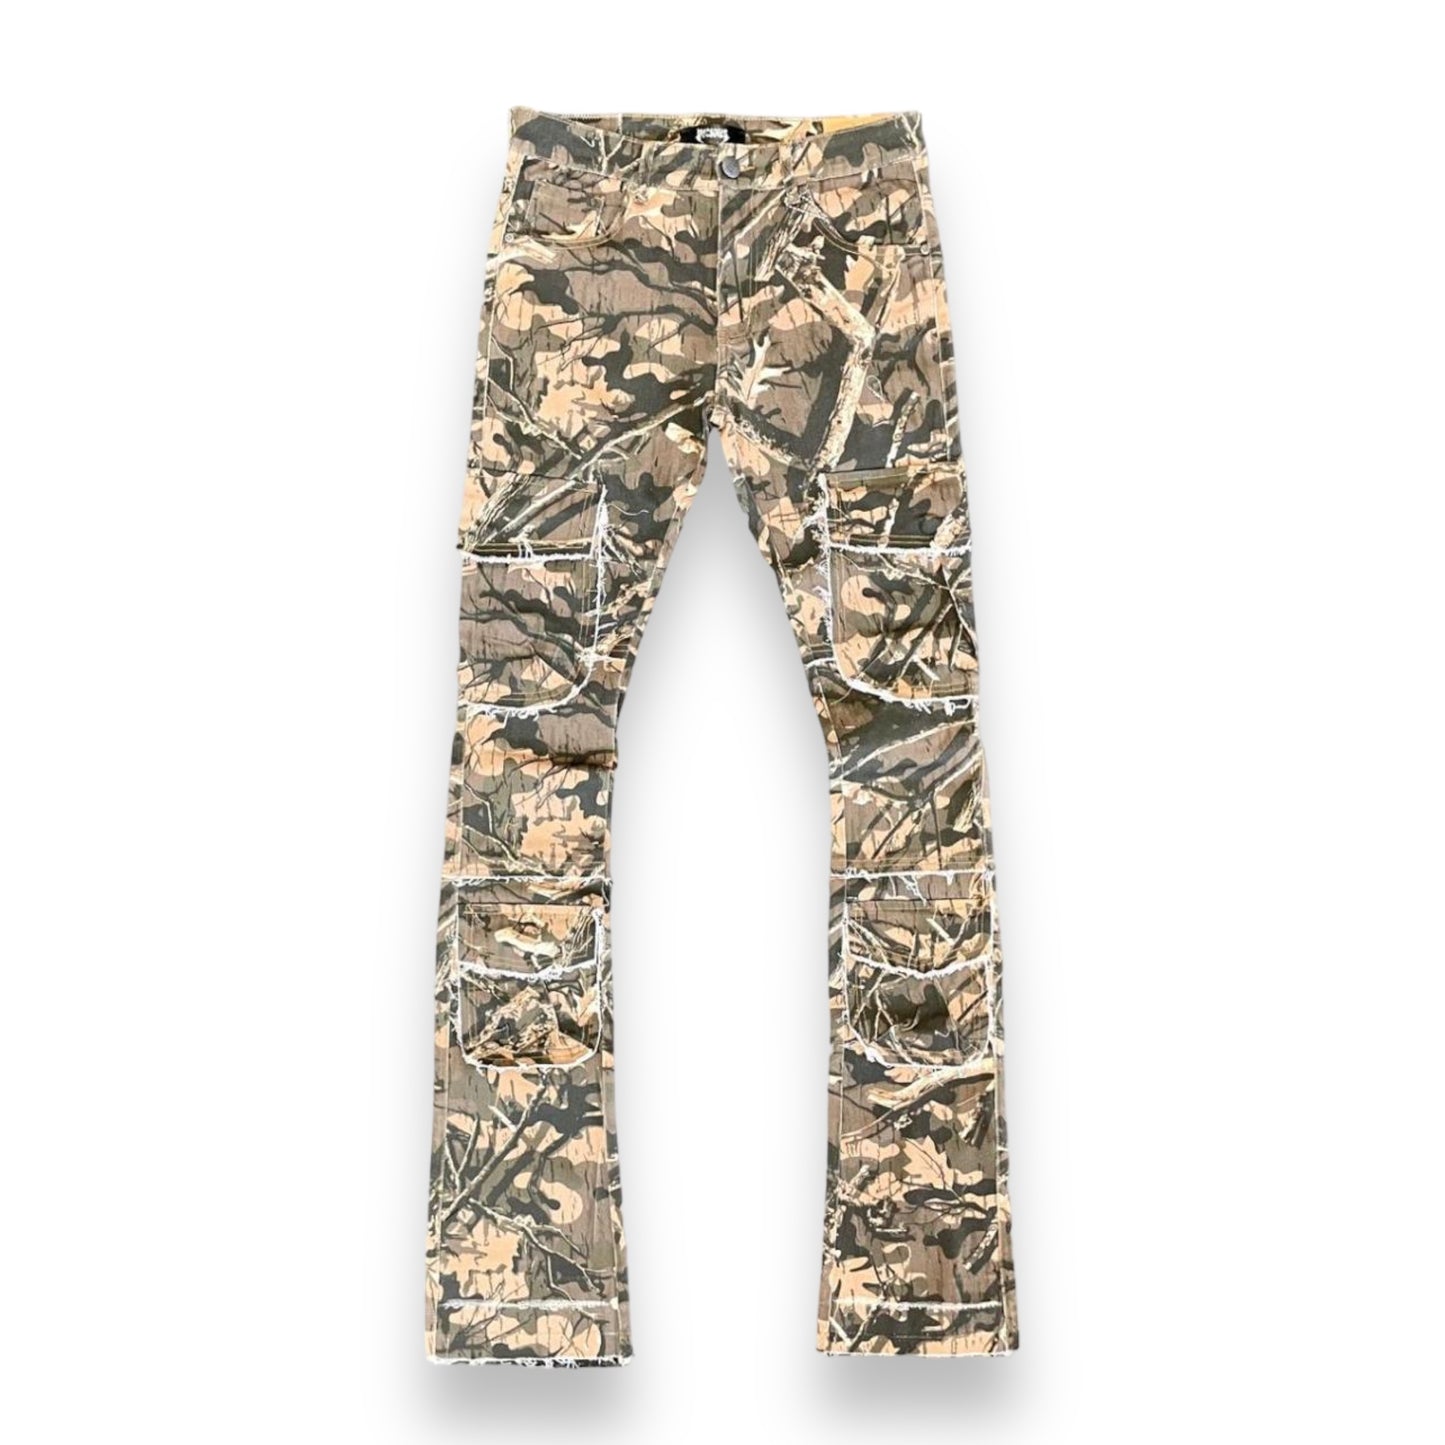 Vicious Denim heavy RIP forest Camo stack jeans